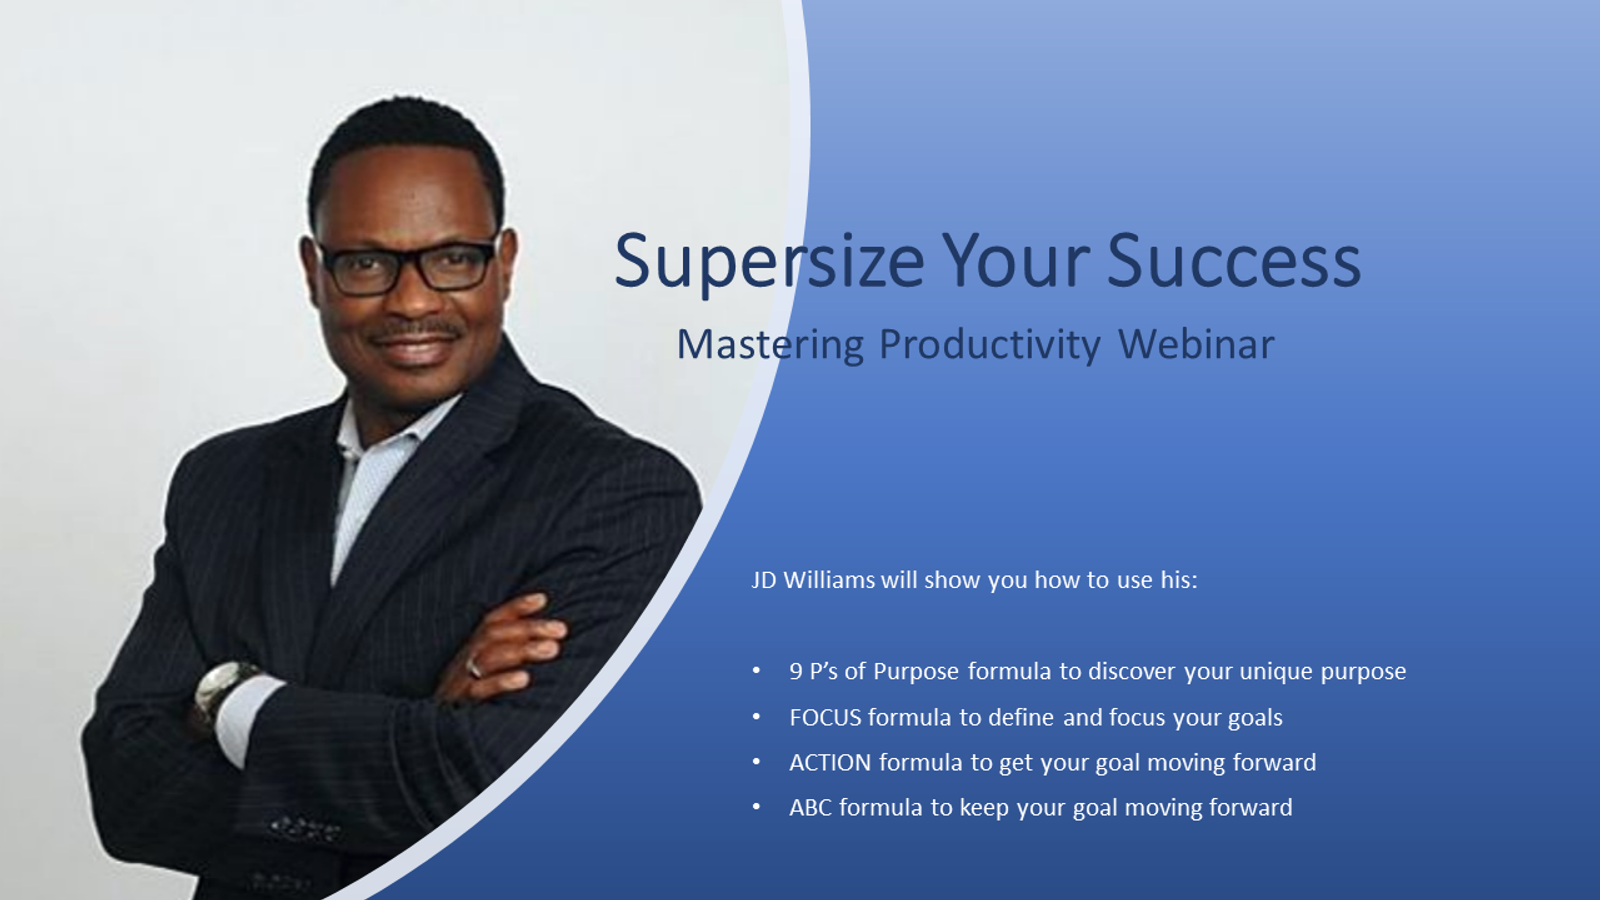 The Supersize Your Success: Mastering Productivity Webinar